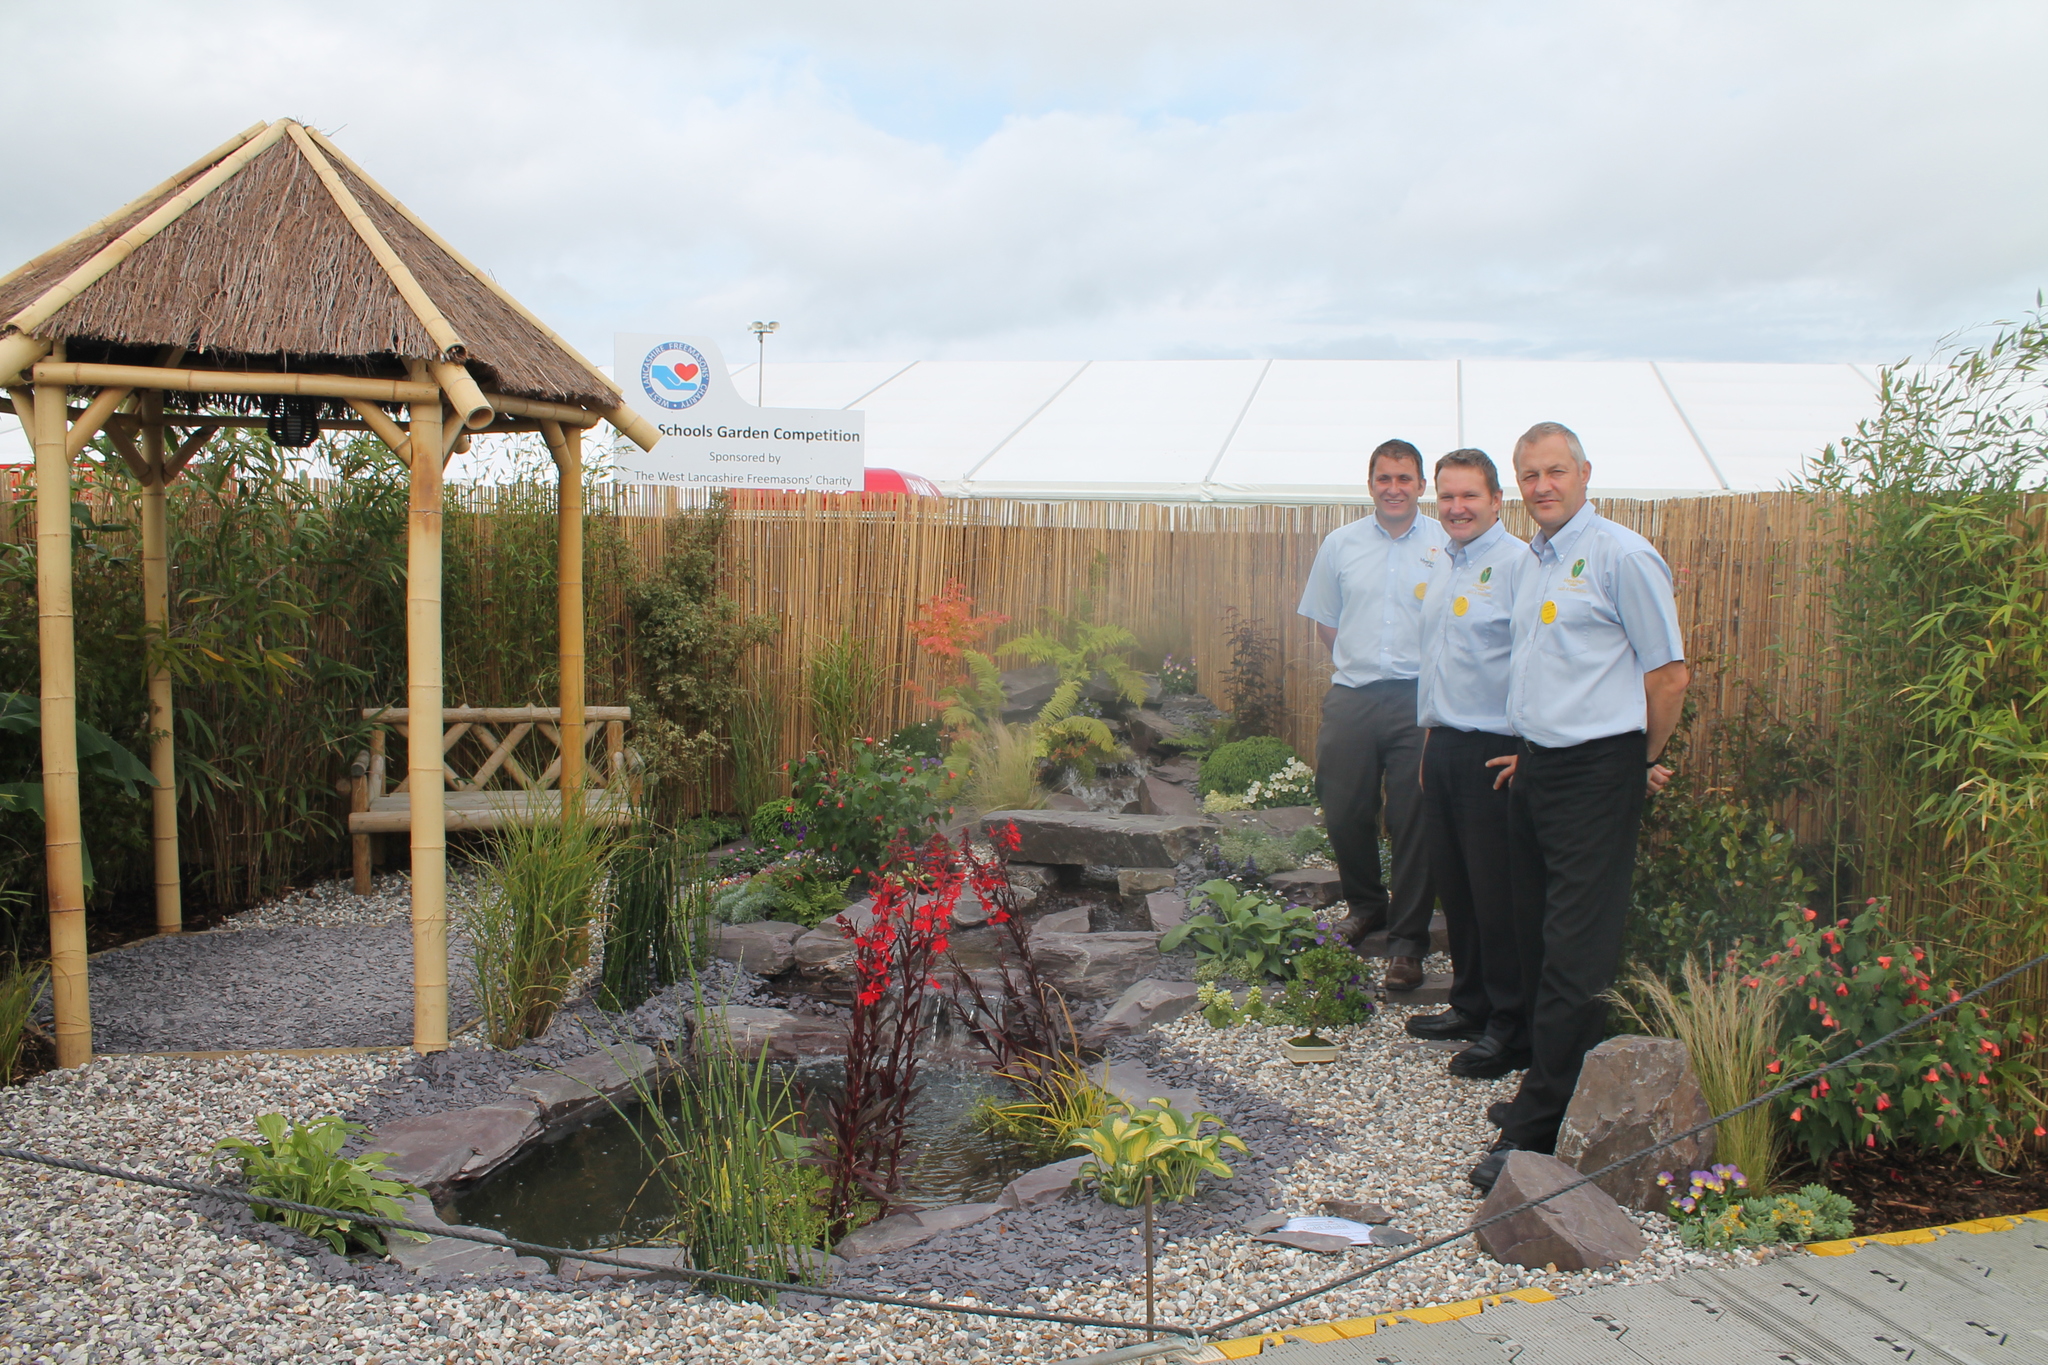 Staff and students won Gold for their entry at the Southport Flower Show in 2015.